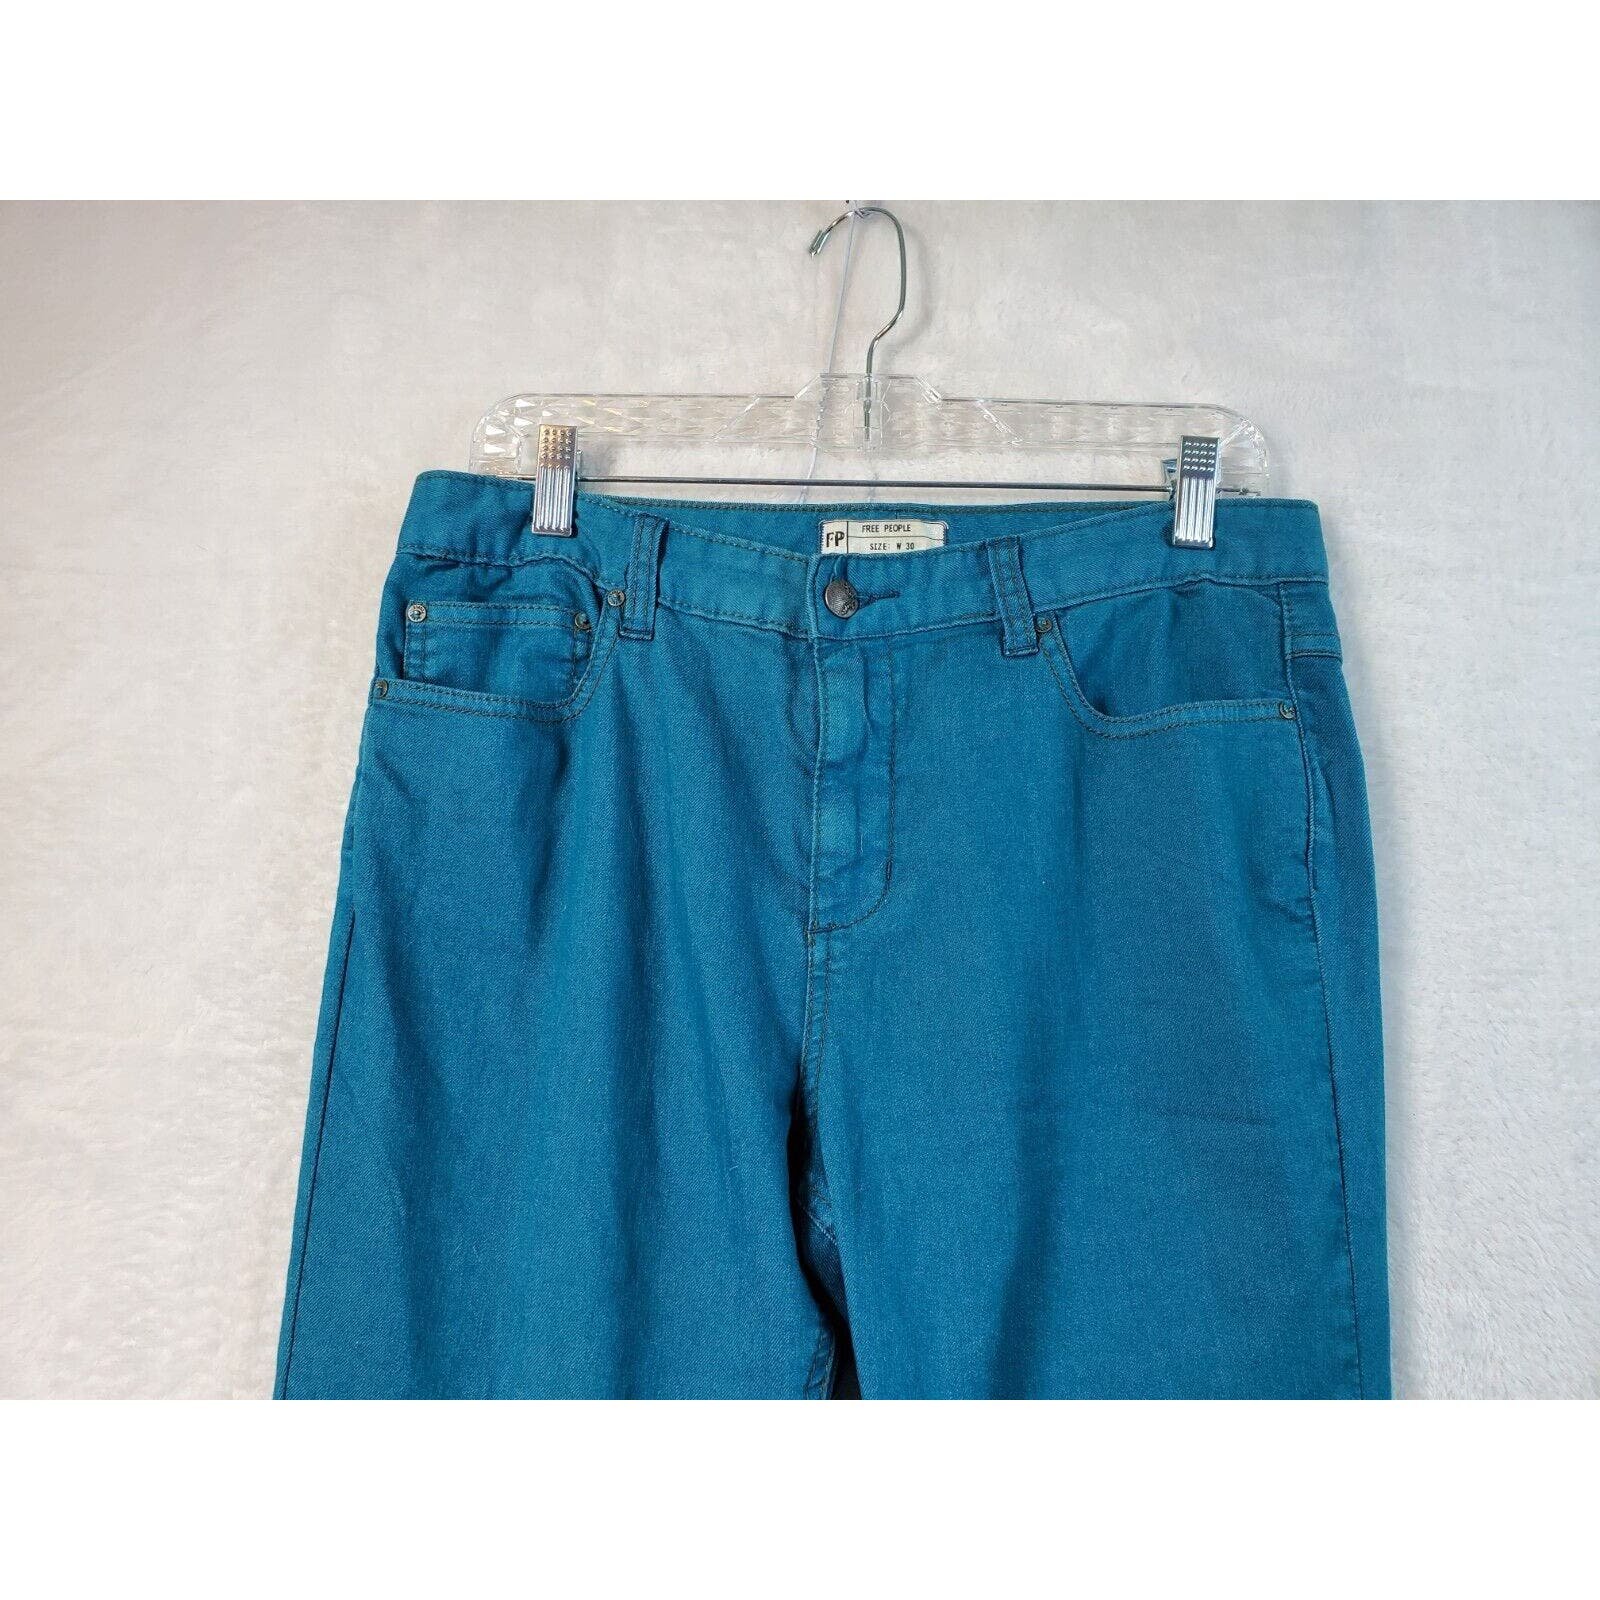 Discounted Free People Pants Womens Size 30 Teal Pockets Straight Leg Belt Loops Pull On LiUIj2IAL Outlet Store